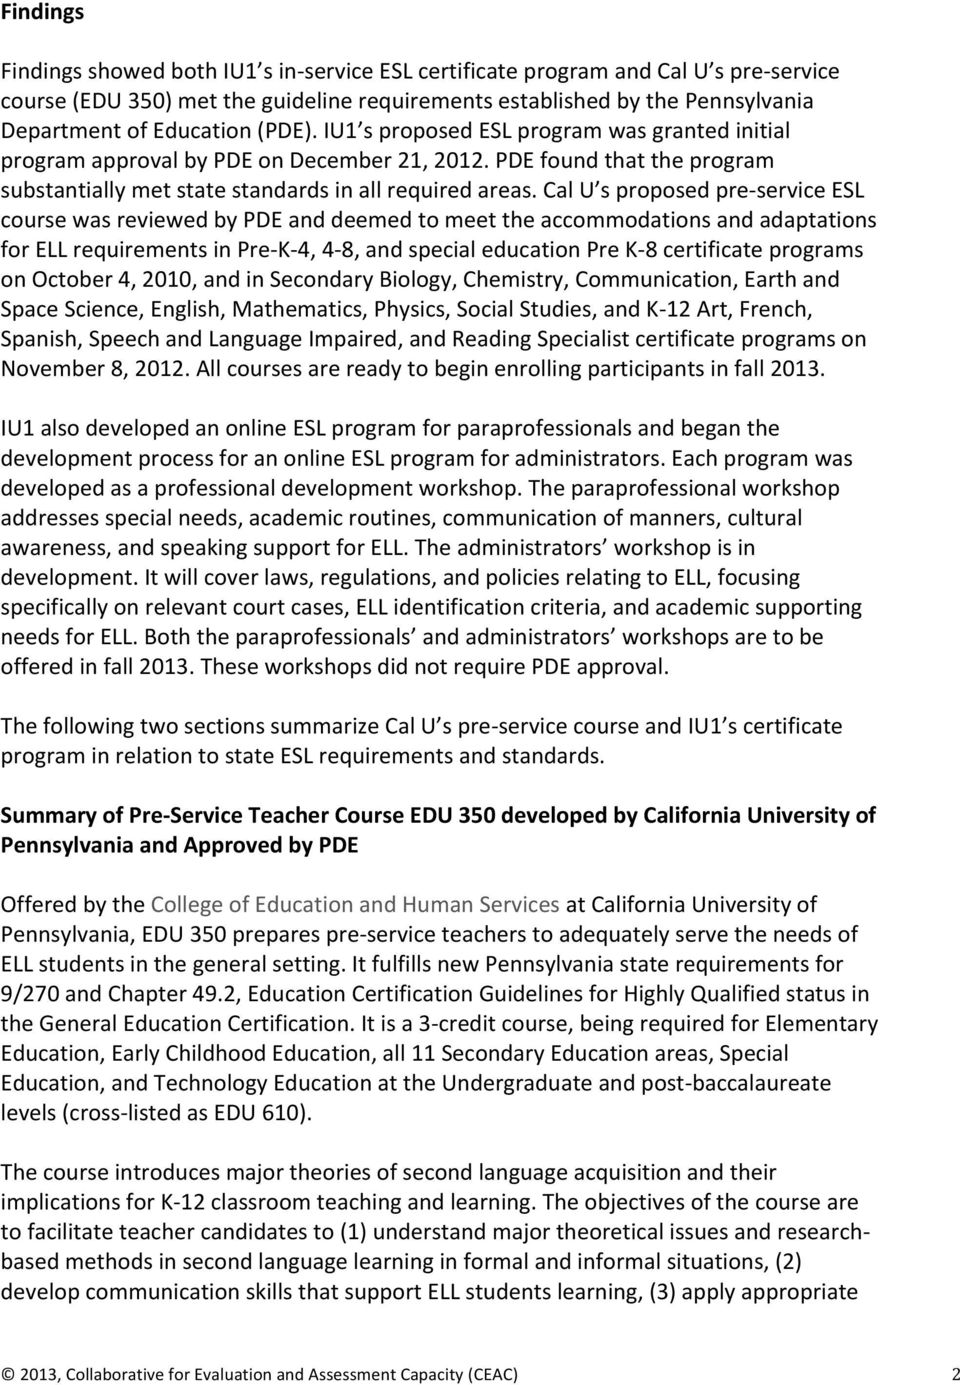 Cal U s proposed pre service ESL course was reviewed by PDE and deemed to meet the accommodations and adaptations for ELL requirements in Pre K 4, 4 8, and special education Pre K 8 certificate